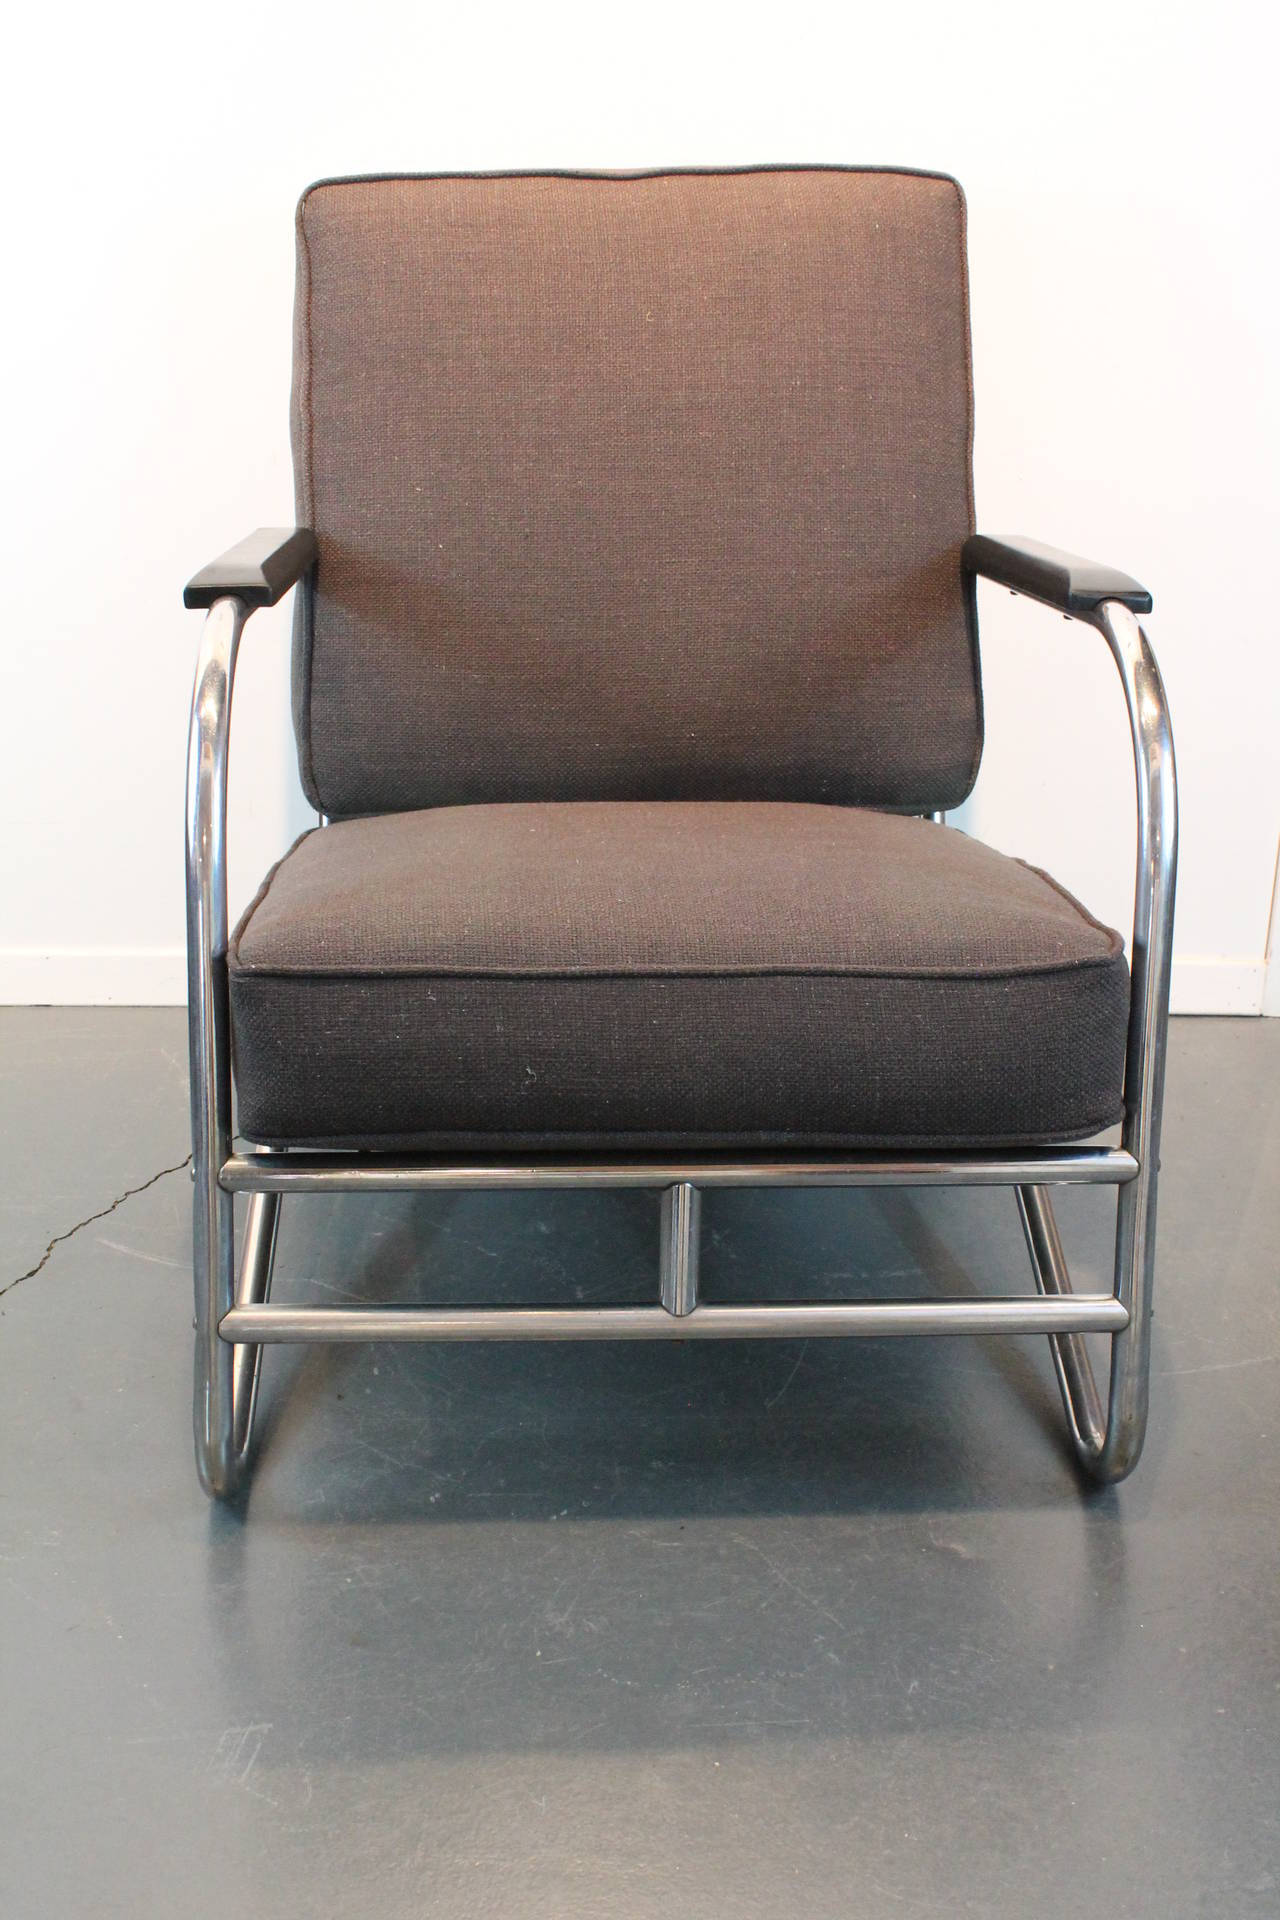 Great profile and tubular chrome structural design in this Art Deco lounge chair , newly reupholstered in charcoal linen.
There are 3 available.